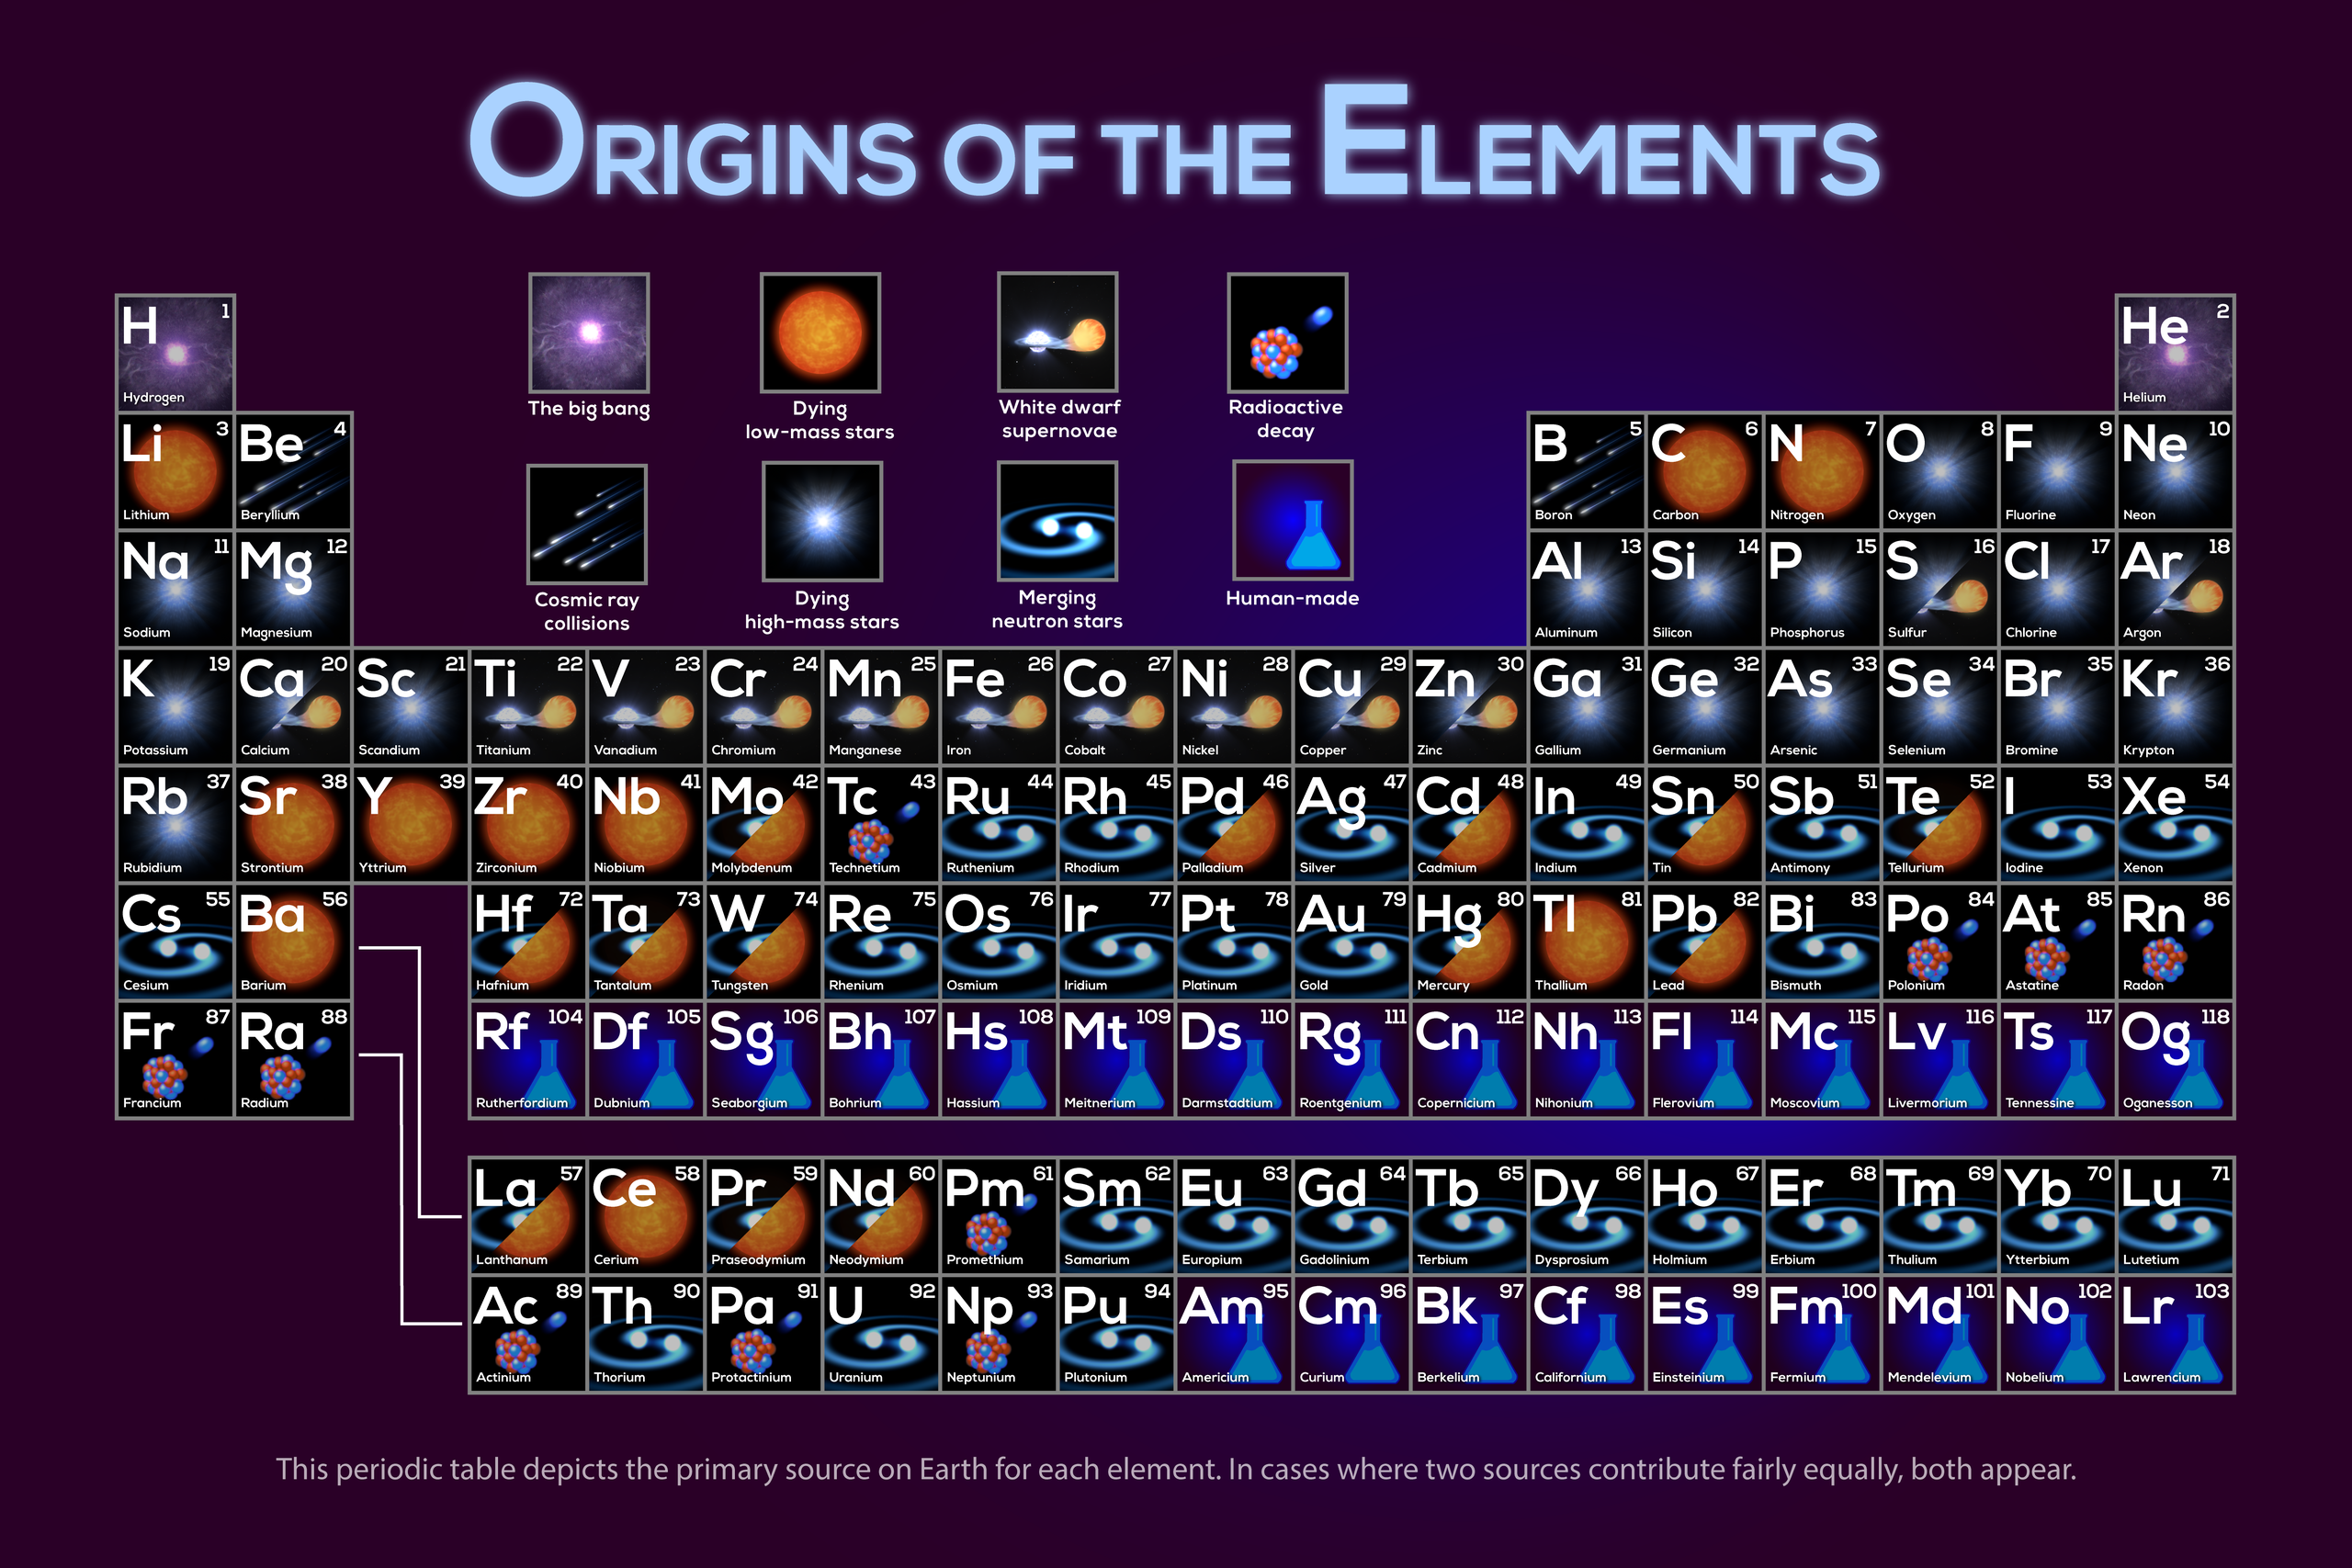 Periodic table showing the most likely origins of each element